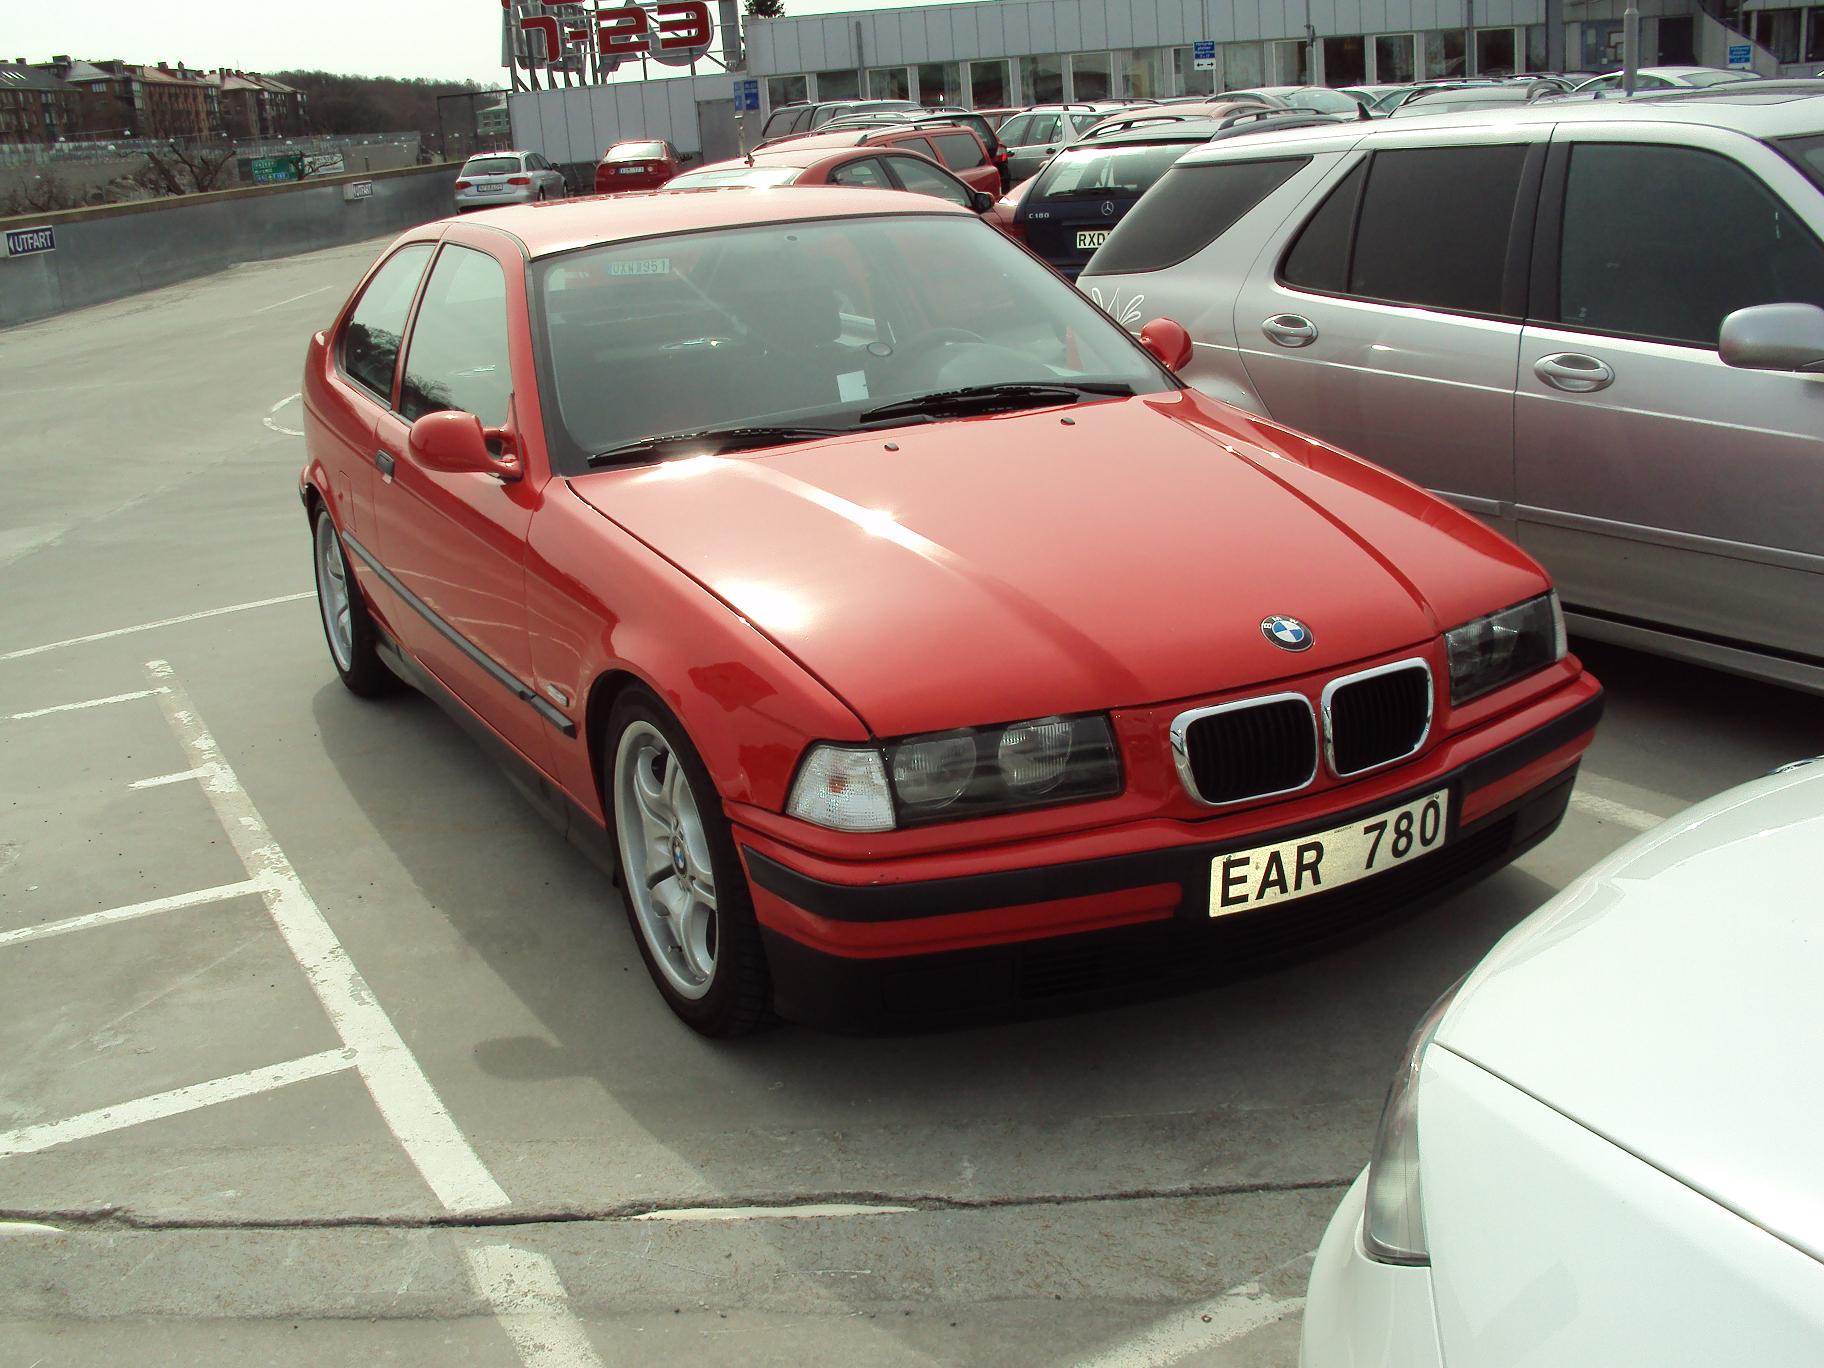 red bmw bmw car is sitting in a parking lot